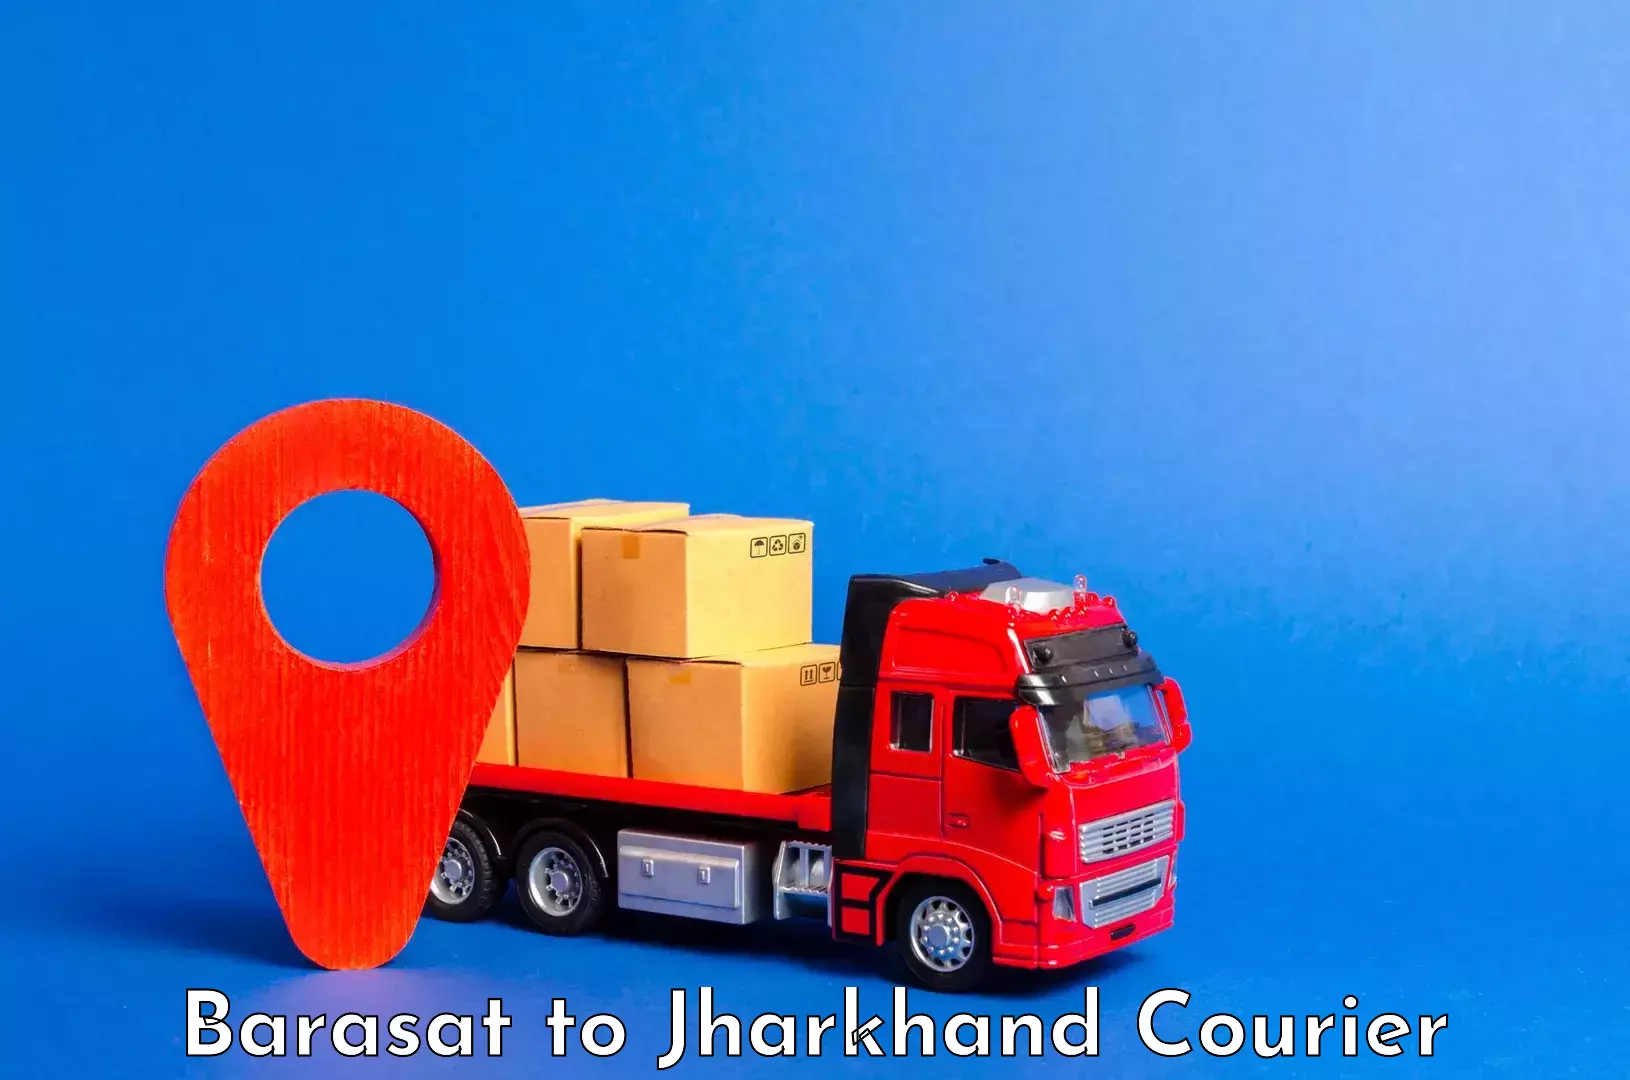 Baggage delivery scheduling Barasat to Jharkhand